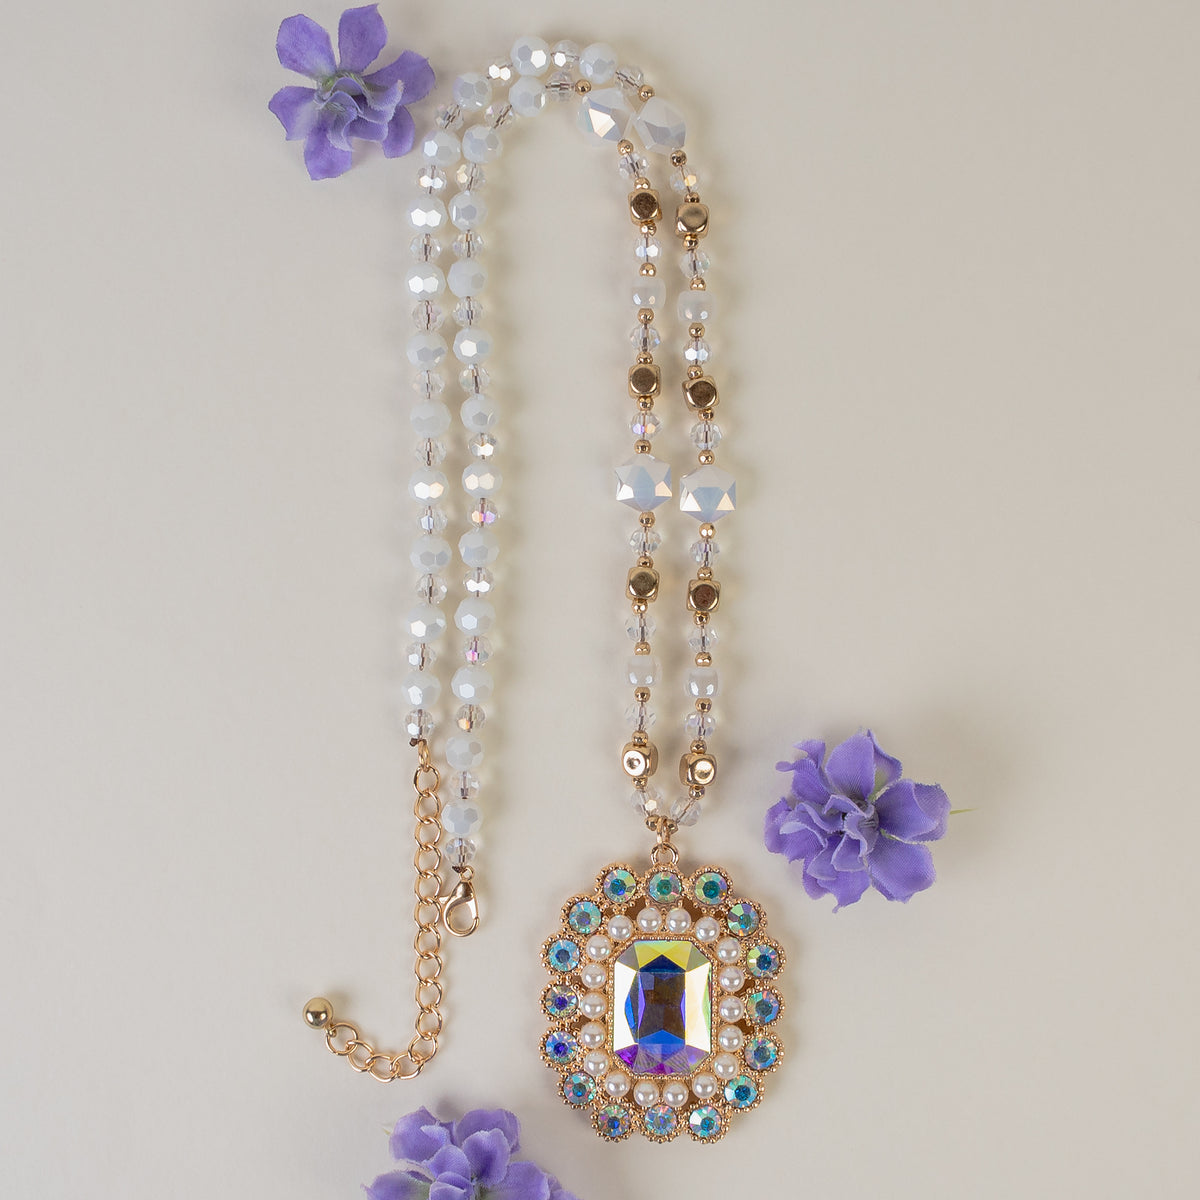 1180 - Crystal Pendant Necklace - AB